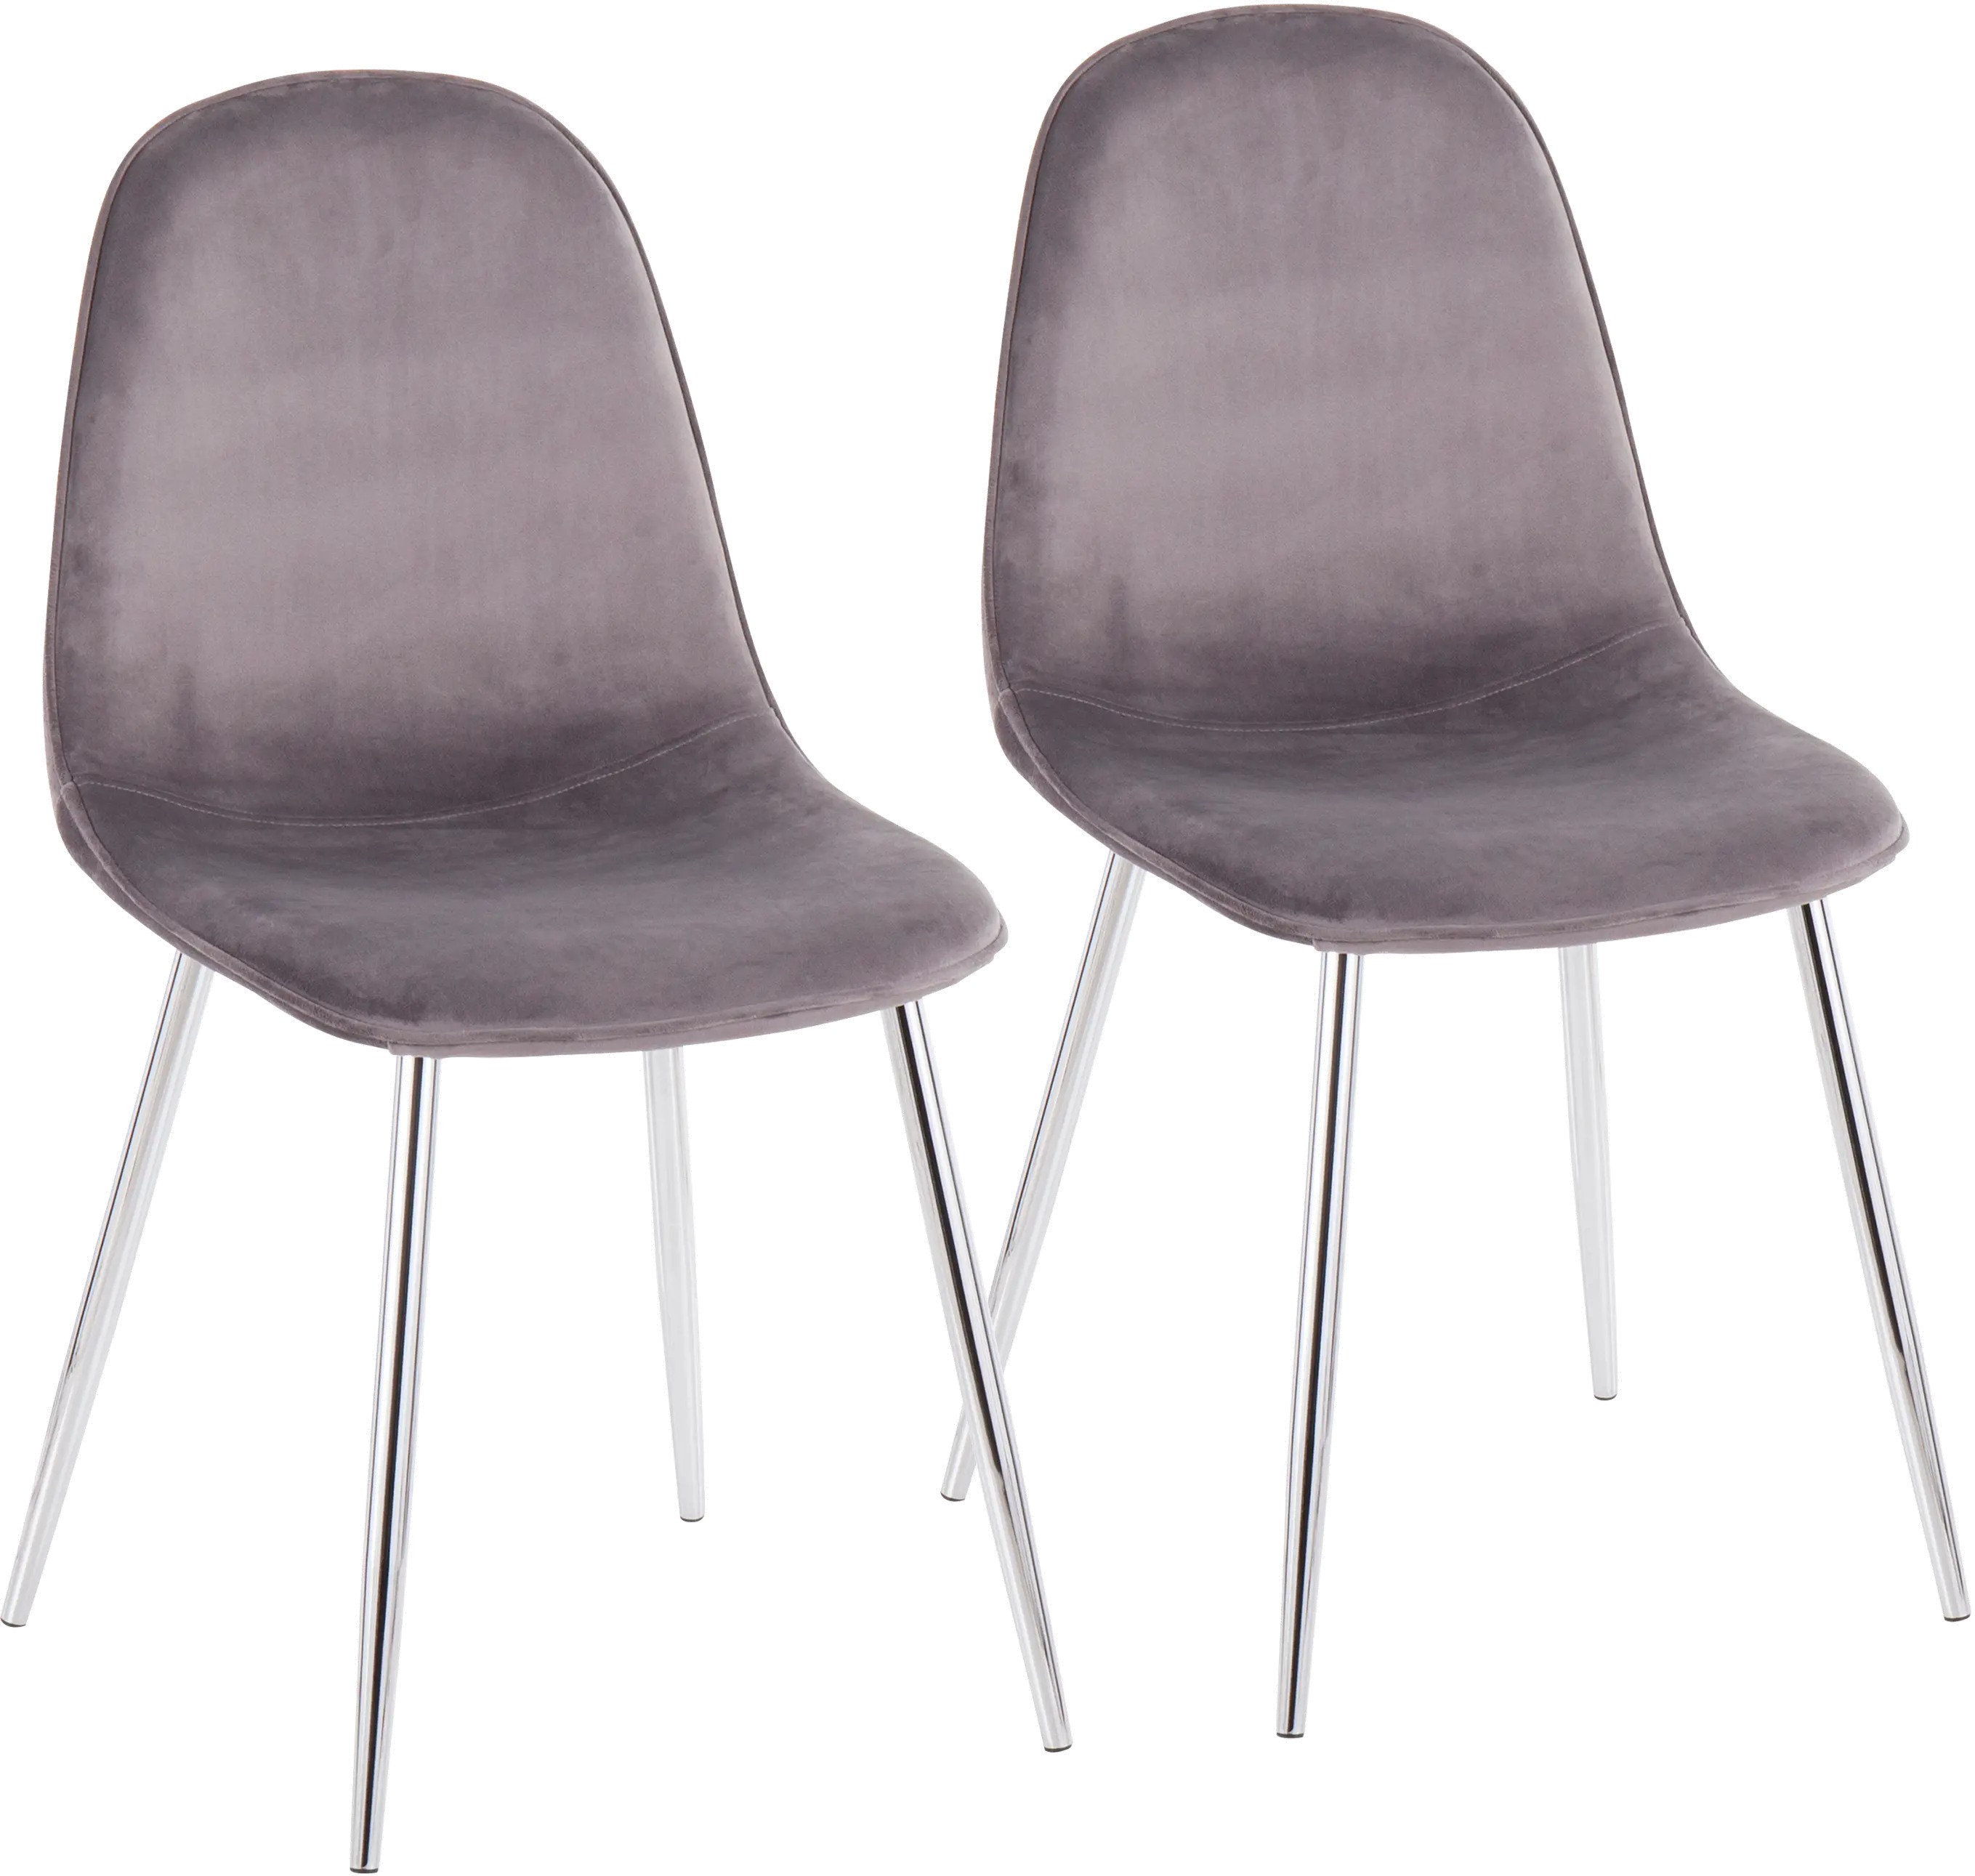 Contemporary Gray and Chrome Dining Room Chair (Set of 2) - Pebble